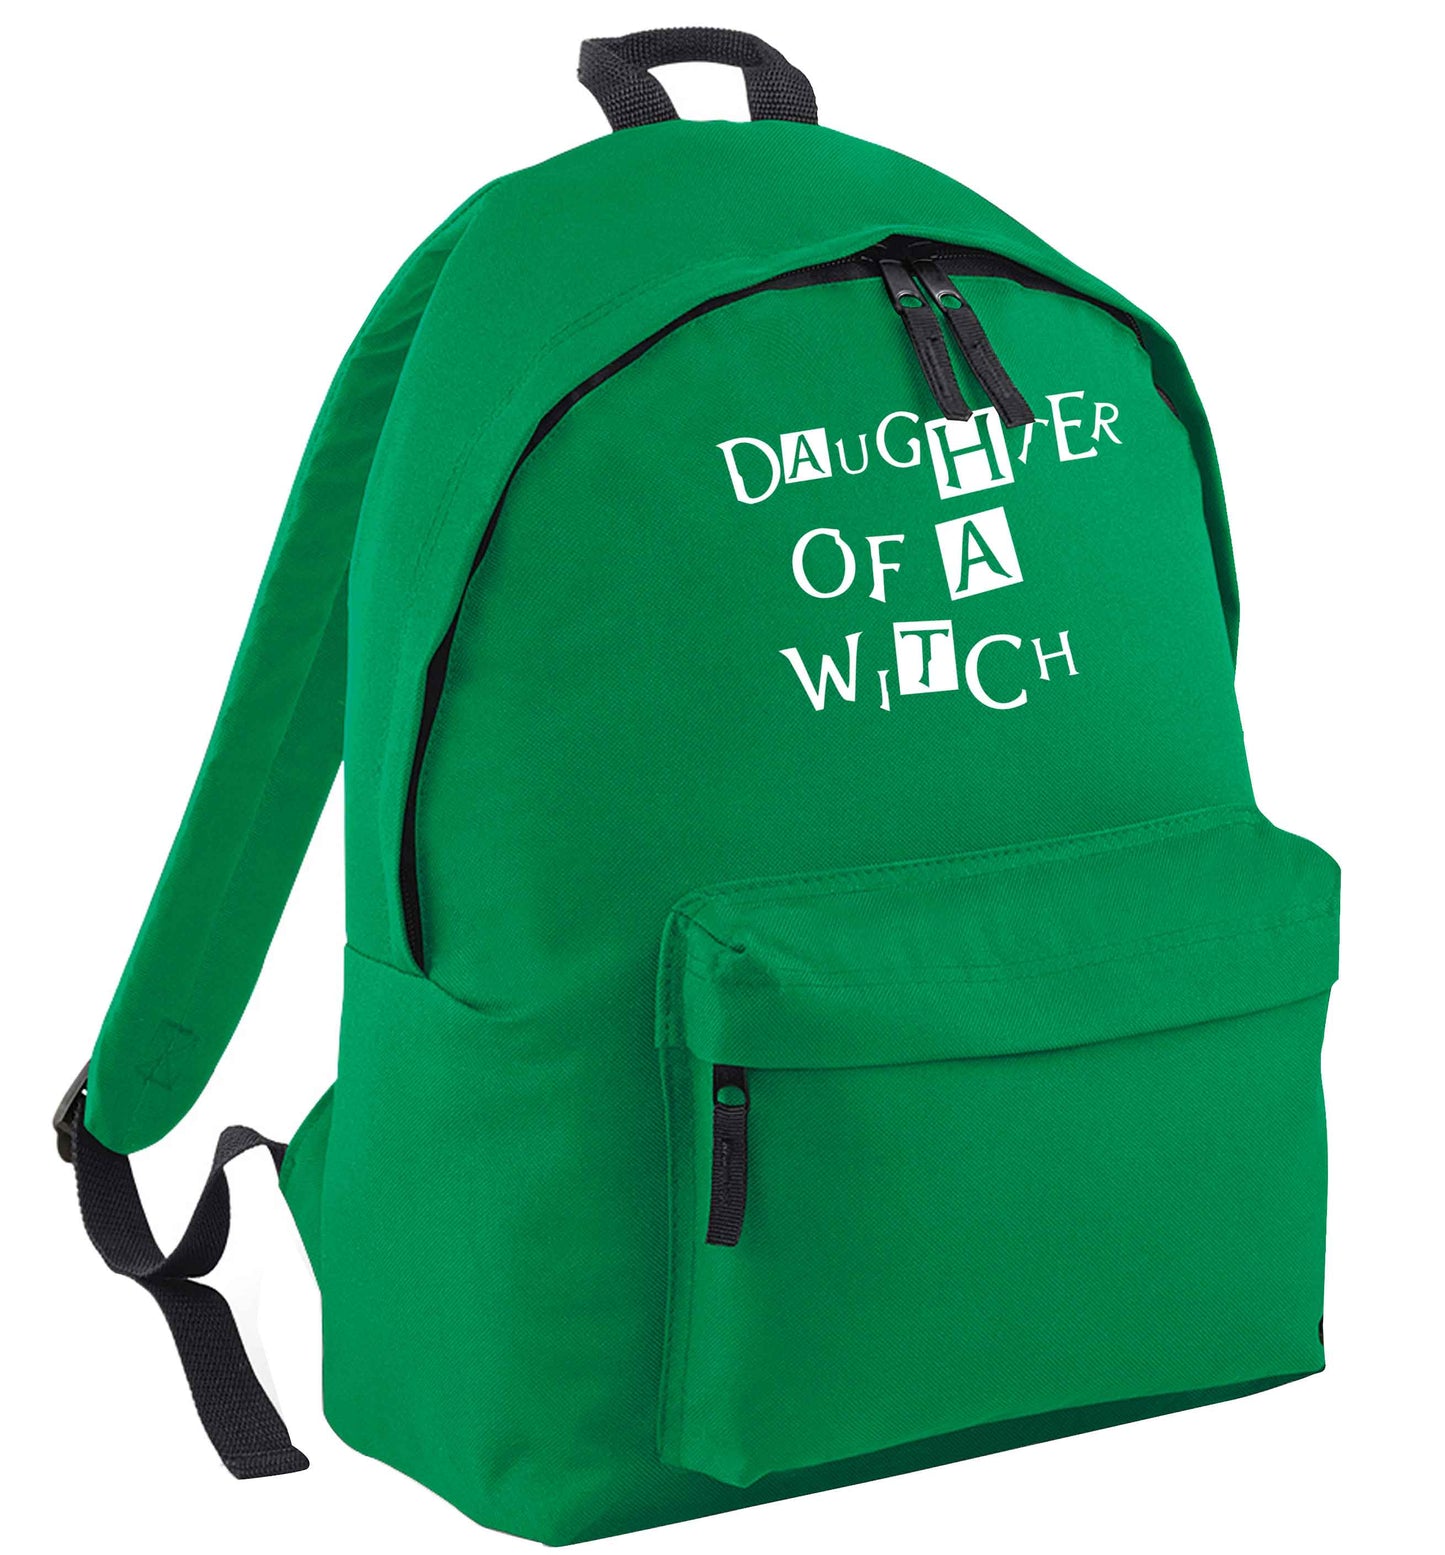 Daughter of a witch green adults backpack